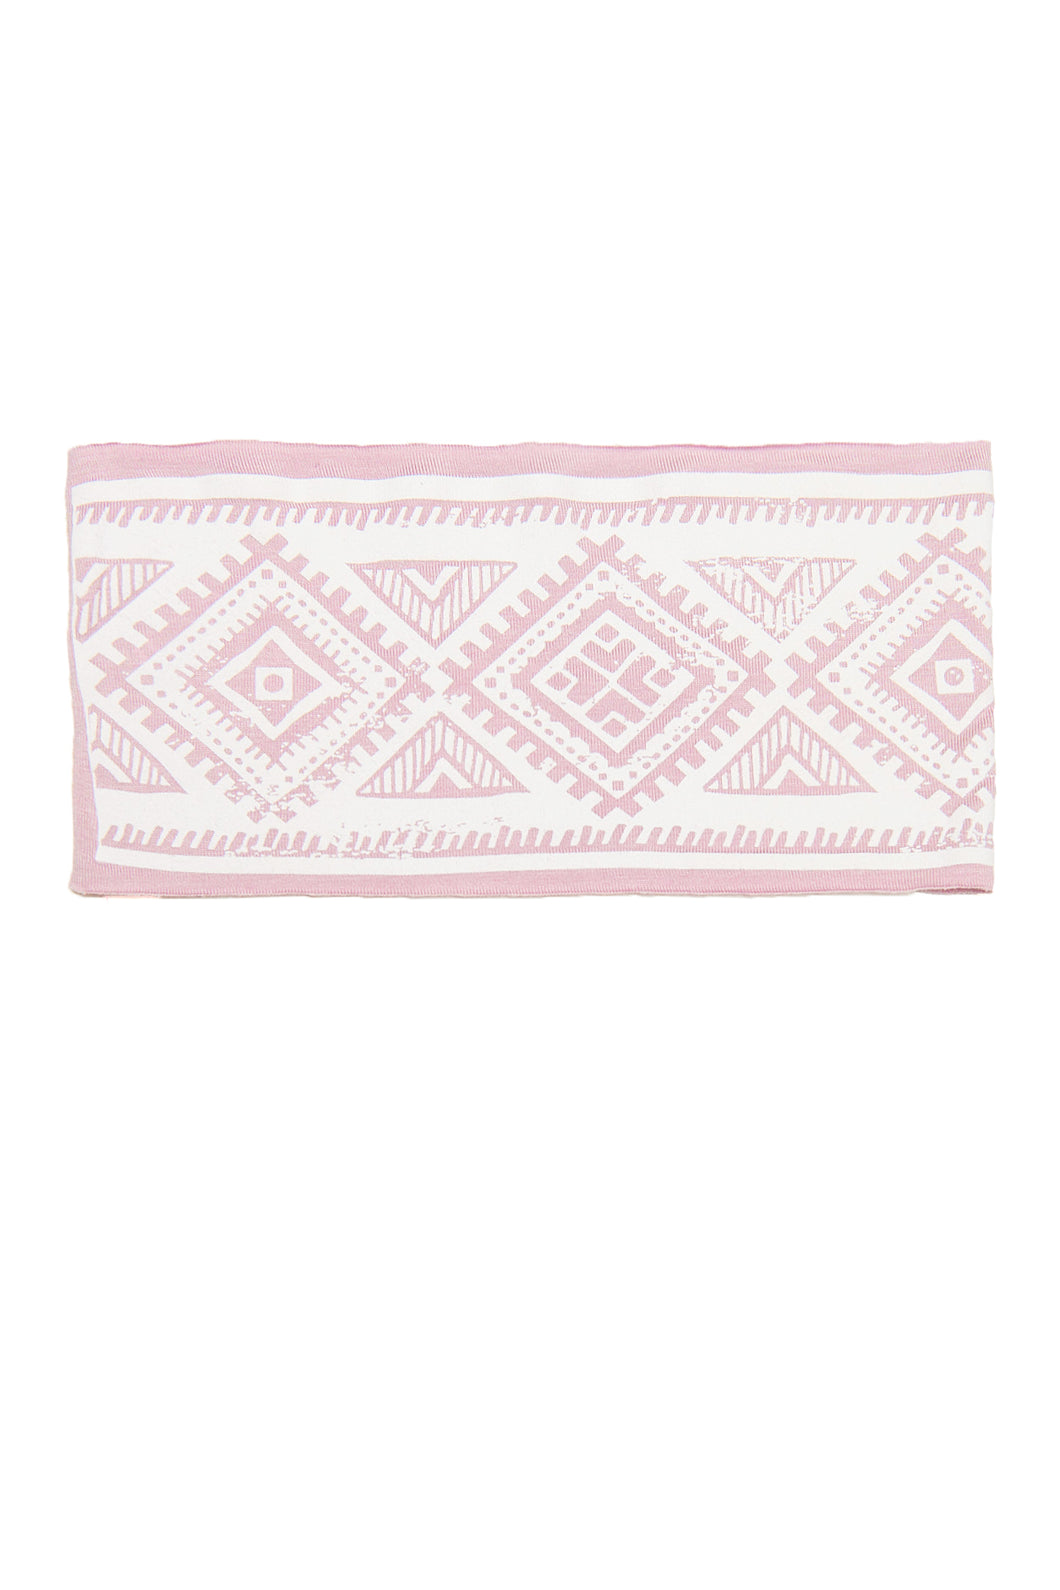 Baja style print tribal road trip headband for kids girls boys in dusty lavender with white pink